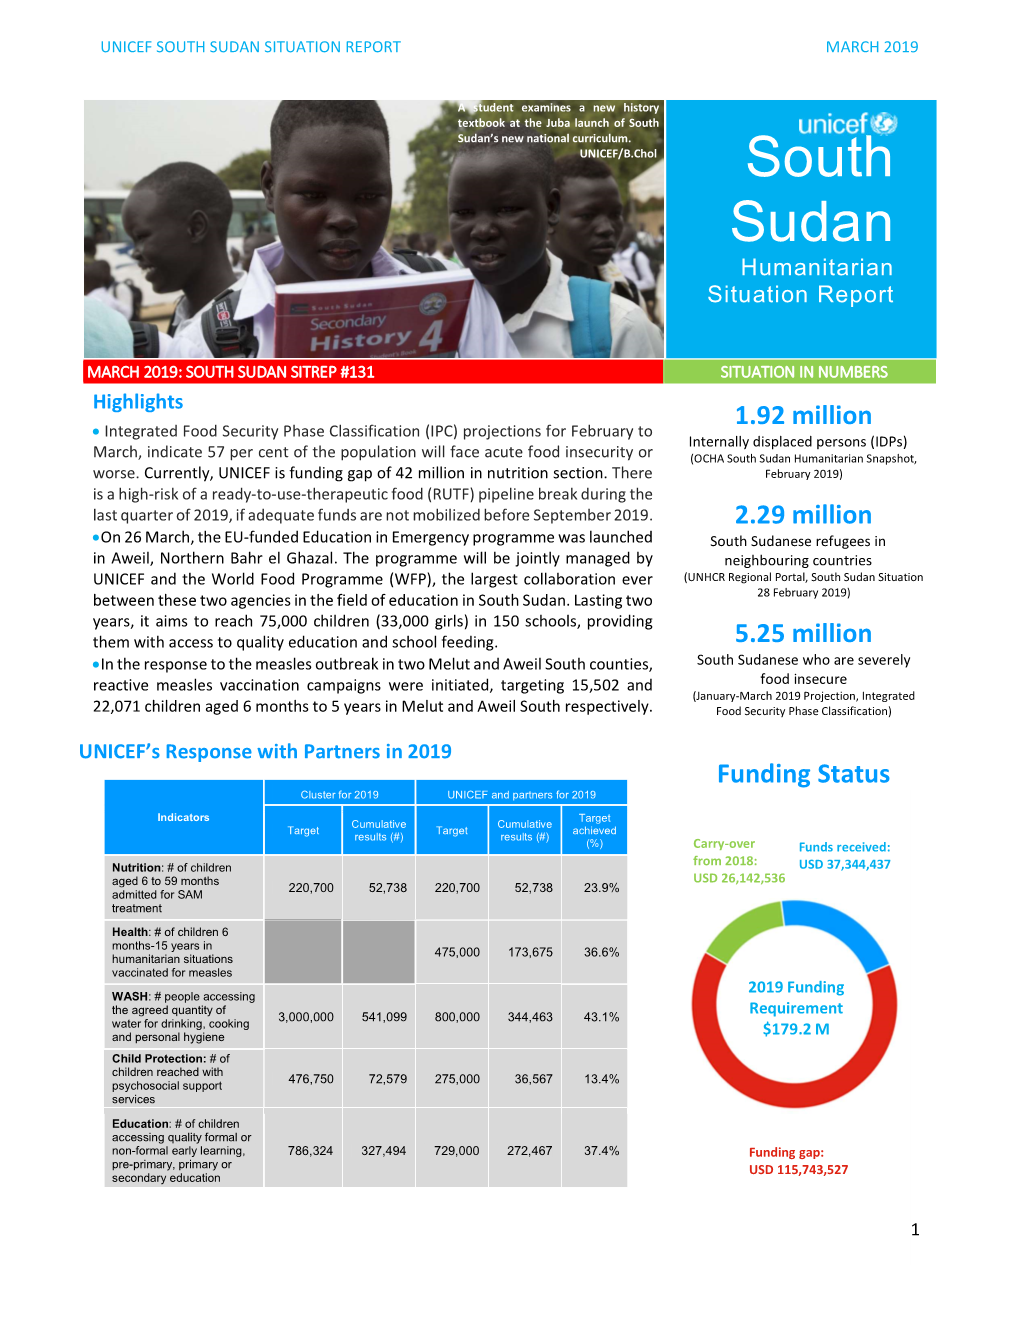 South Sudan Situation Report March 2019